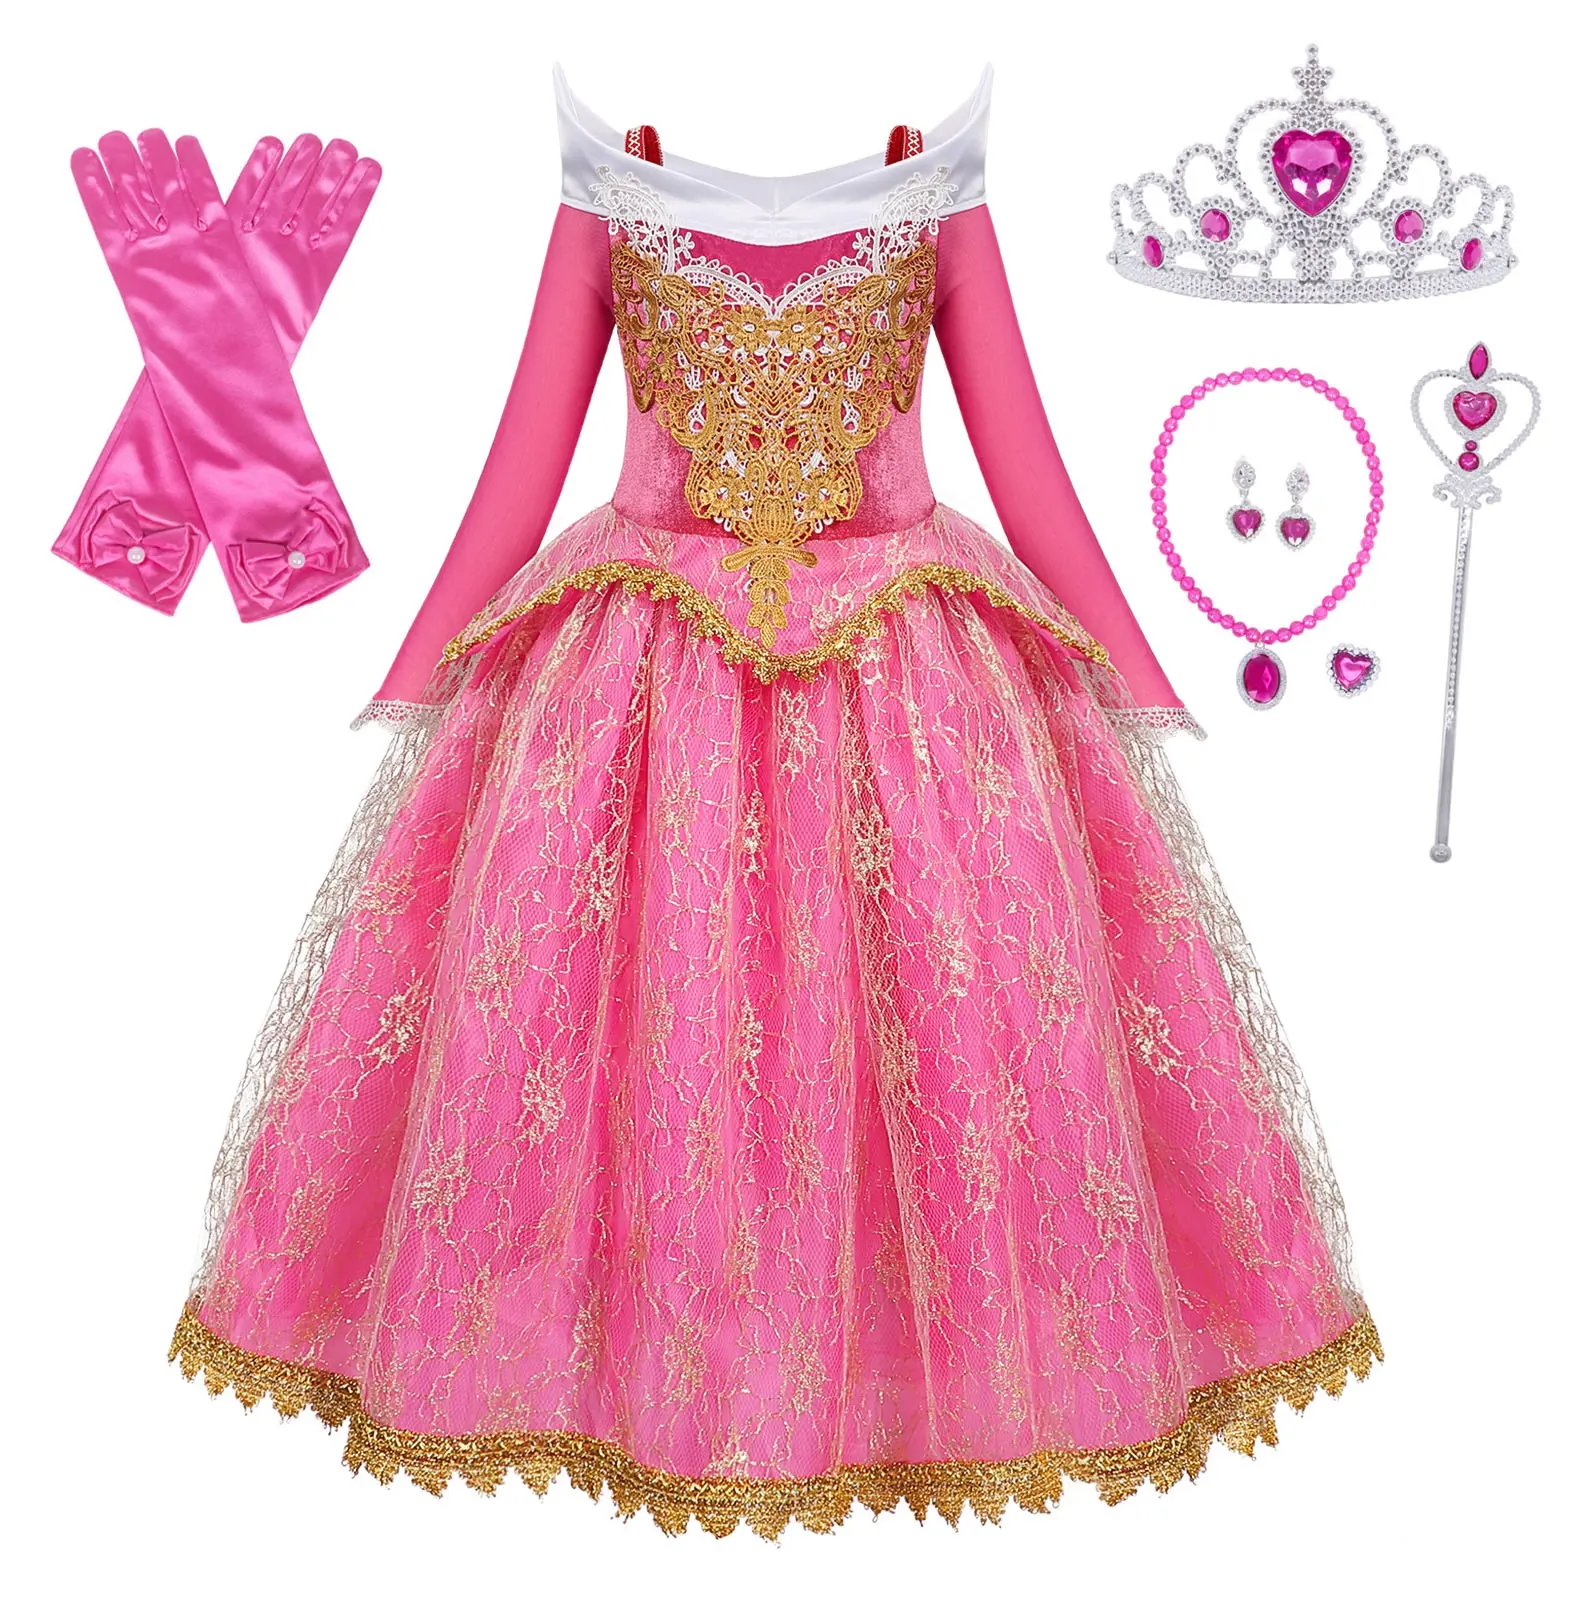 AmzBarley Girl Fancy Deluxe Sleeping Beauty Halloween Princess Costume Party Aurora Dress Up Kids Red Layered Christmas Pay wear